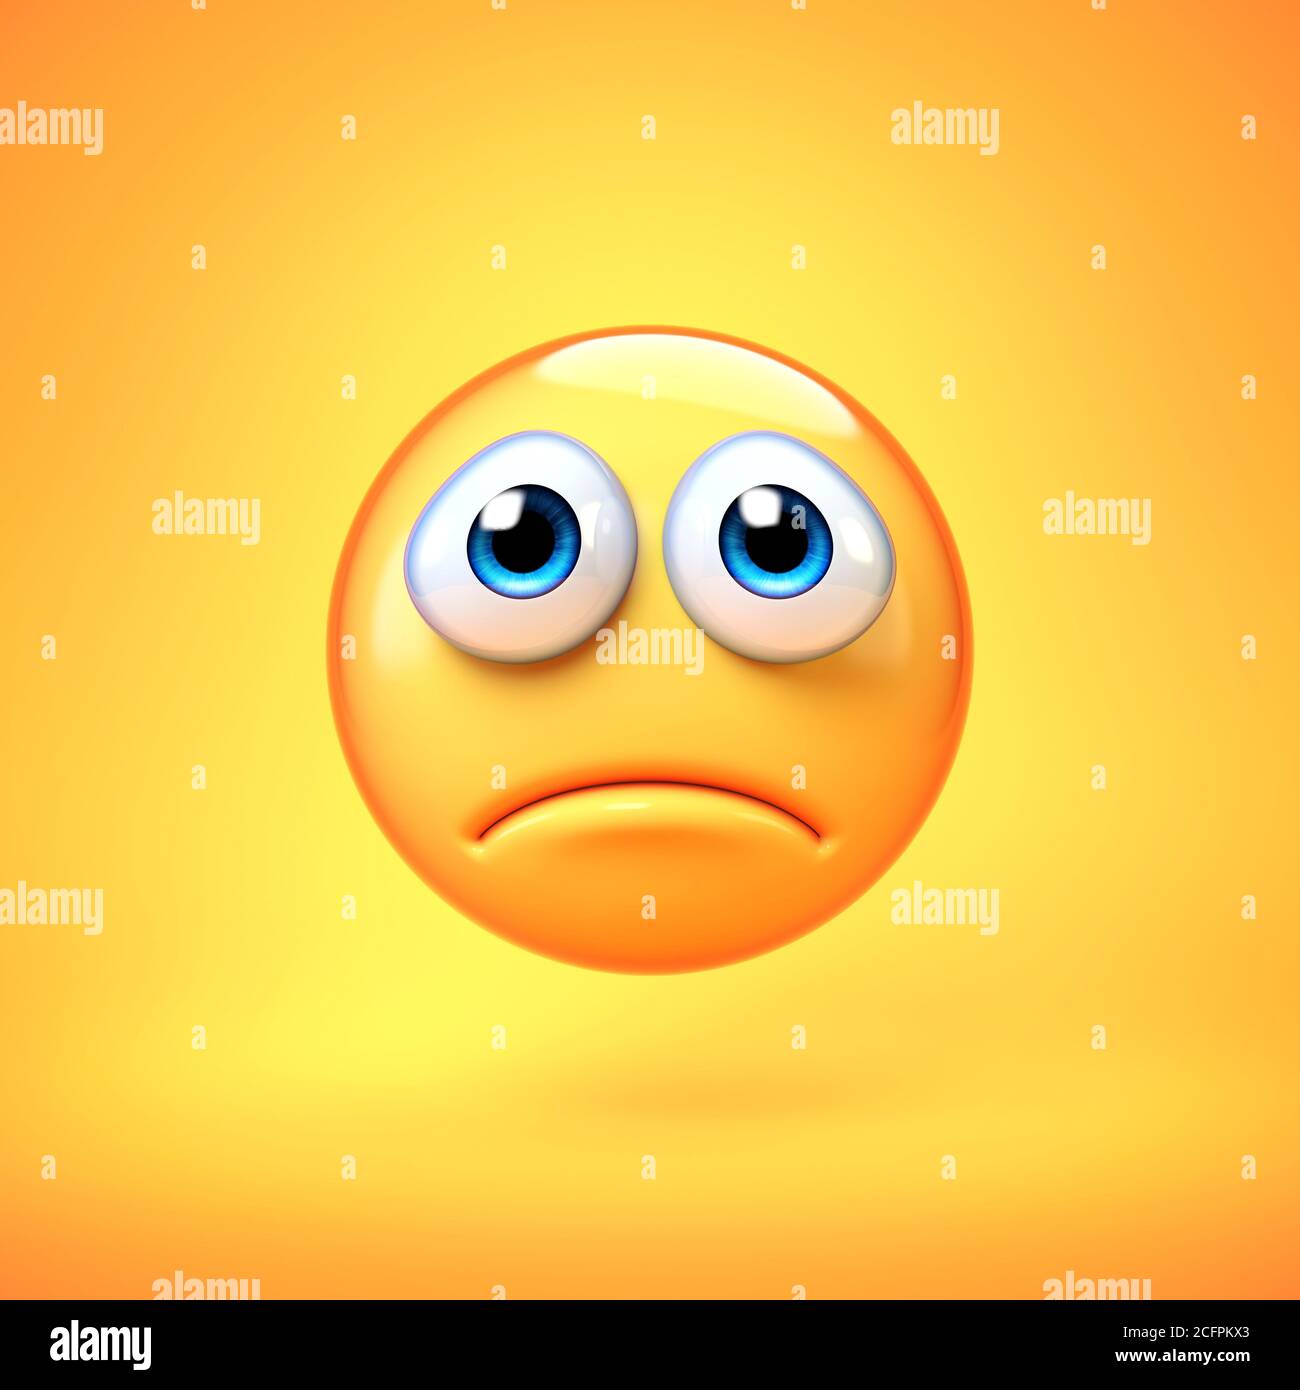 An Amazing Collection of Full 4K Sad Emoji Images, Featuring 999+ Emojis